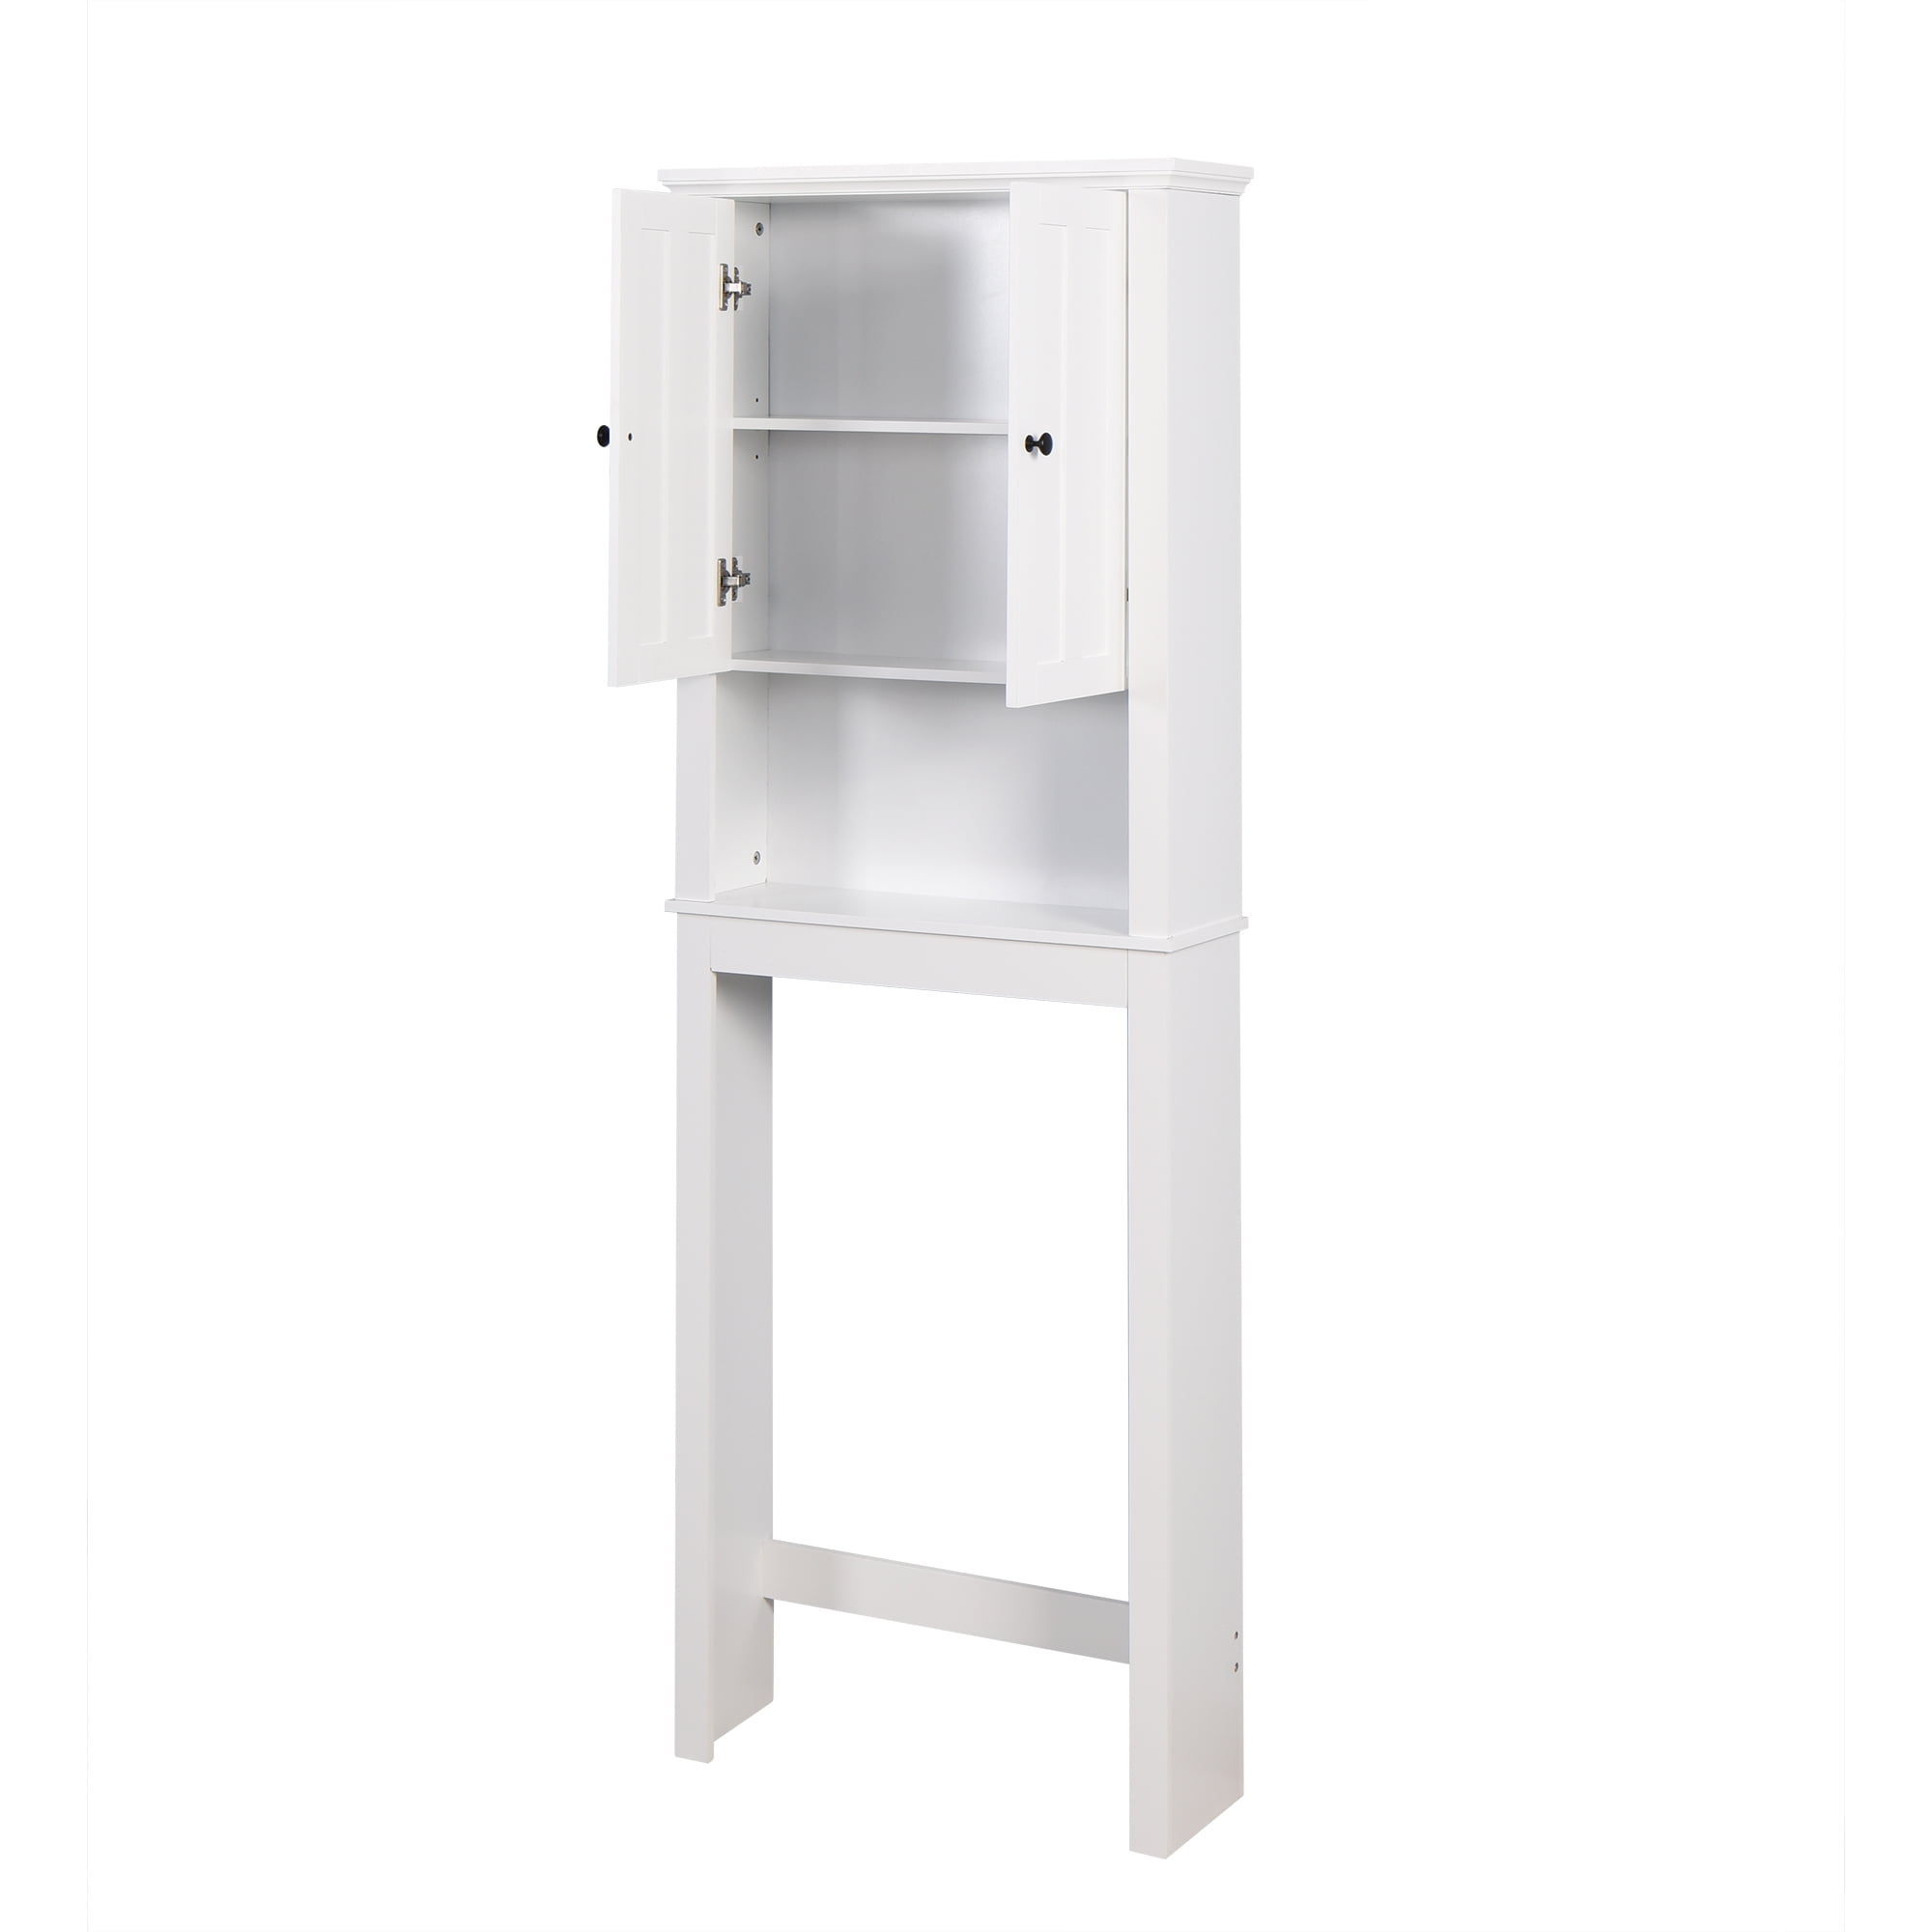 Tileon 23.6 in. W x 62 in. H x 9.1 in. H D White MDF Bathroom Shelf Over The Toilet Storage Cabinet Space Saver with 3-Shelf